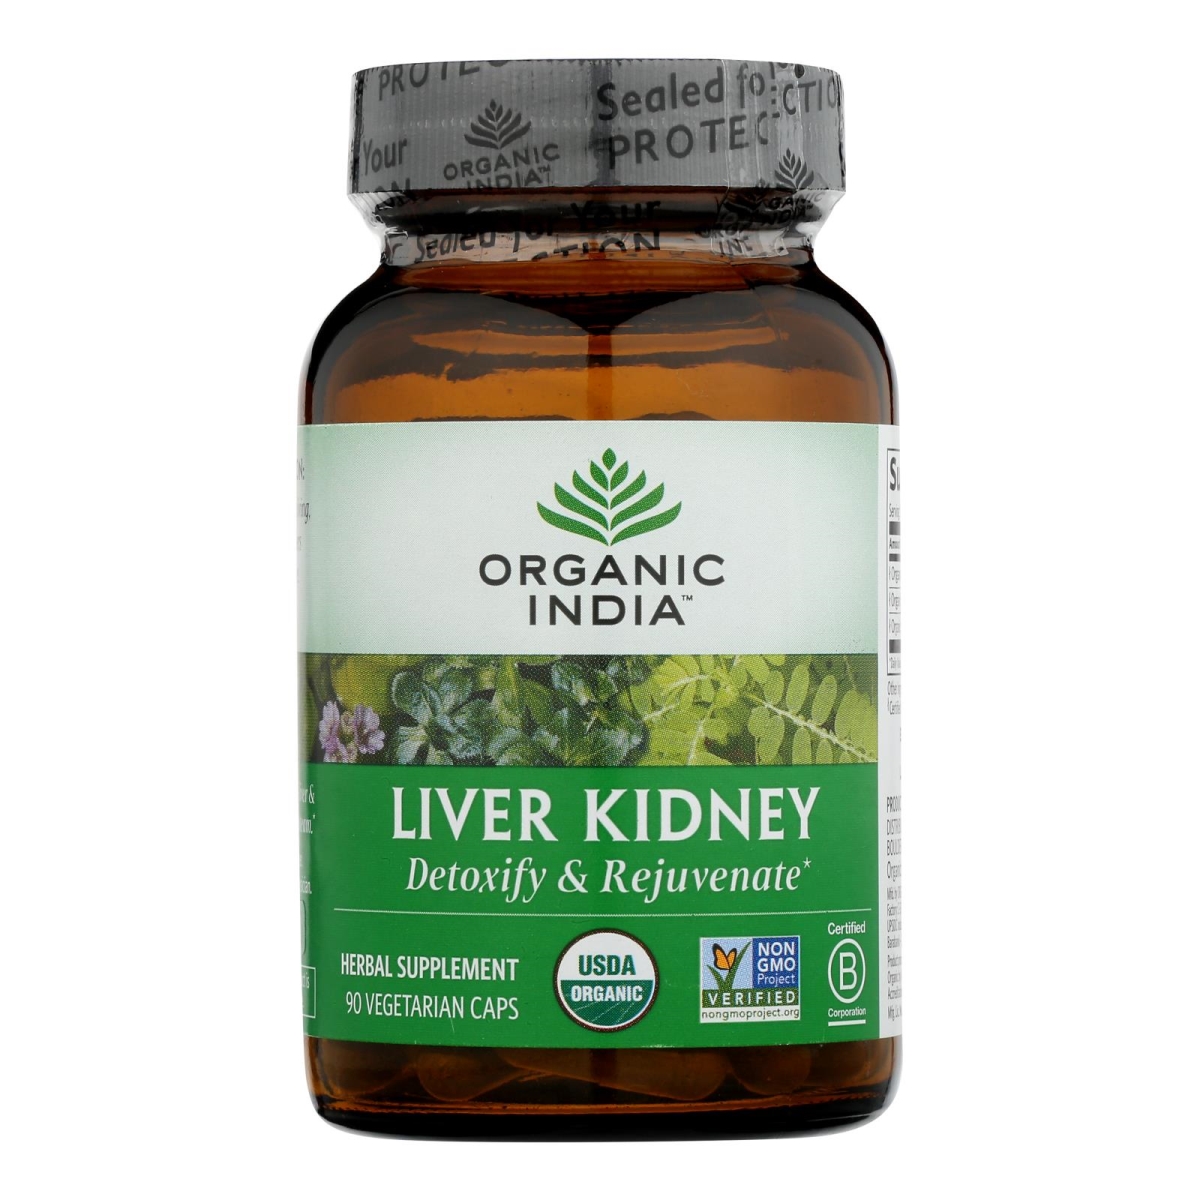 Picture of Organic India HG1889237 Liver Kidney USA Whole Herbal Supplement - 90 Vegetarian Capsules